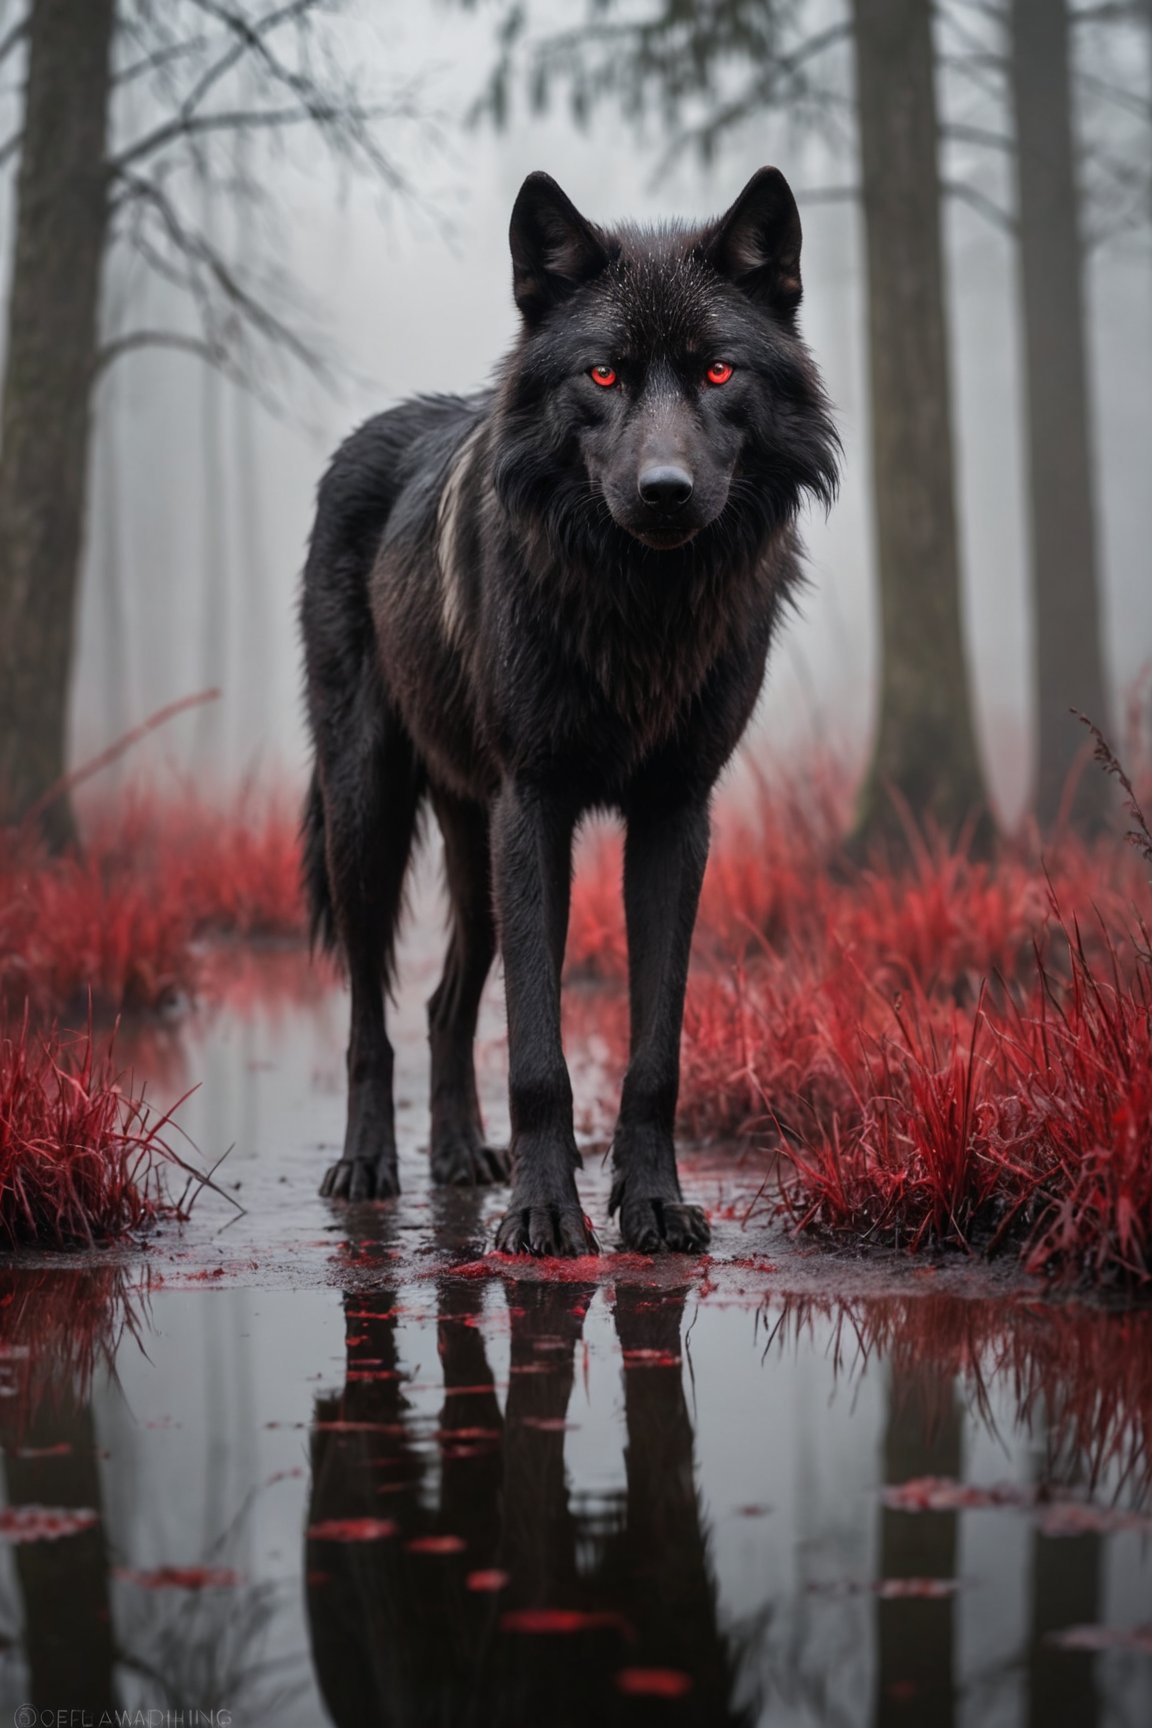 photo, portrait of a black wolf with red eyes, swamp, fog, refecting puddles, awardwinning